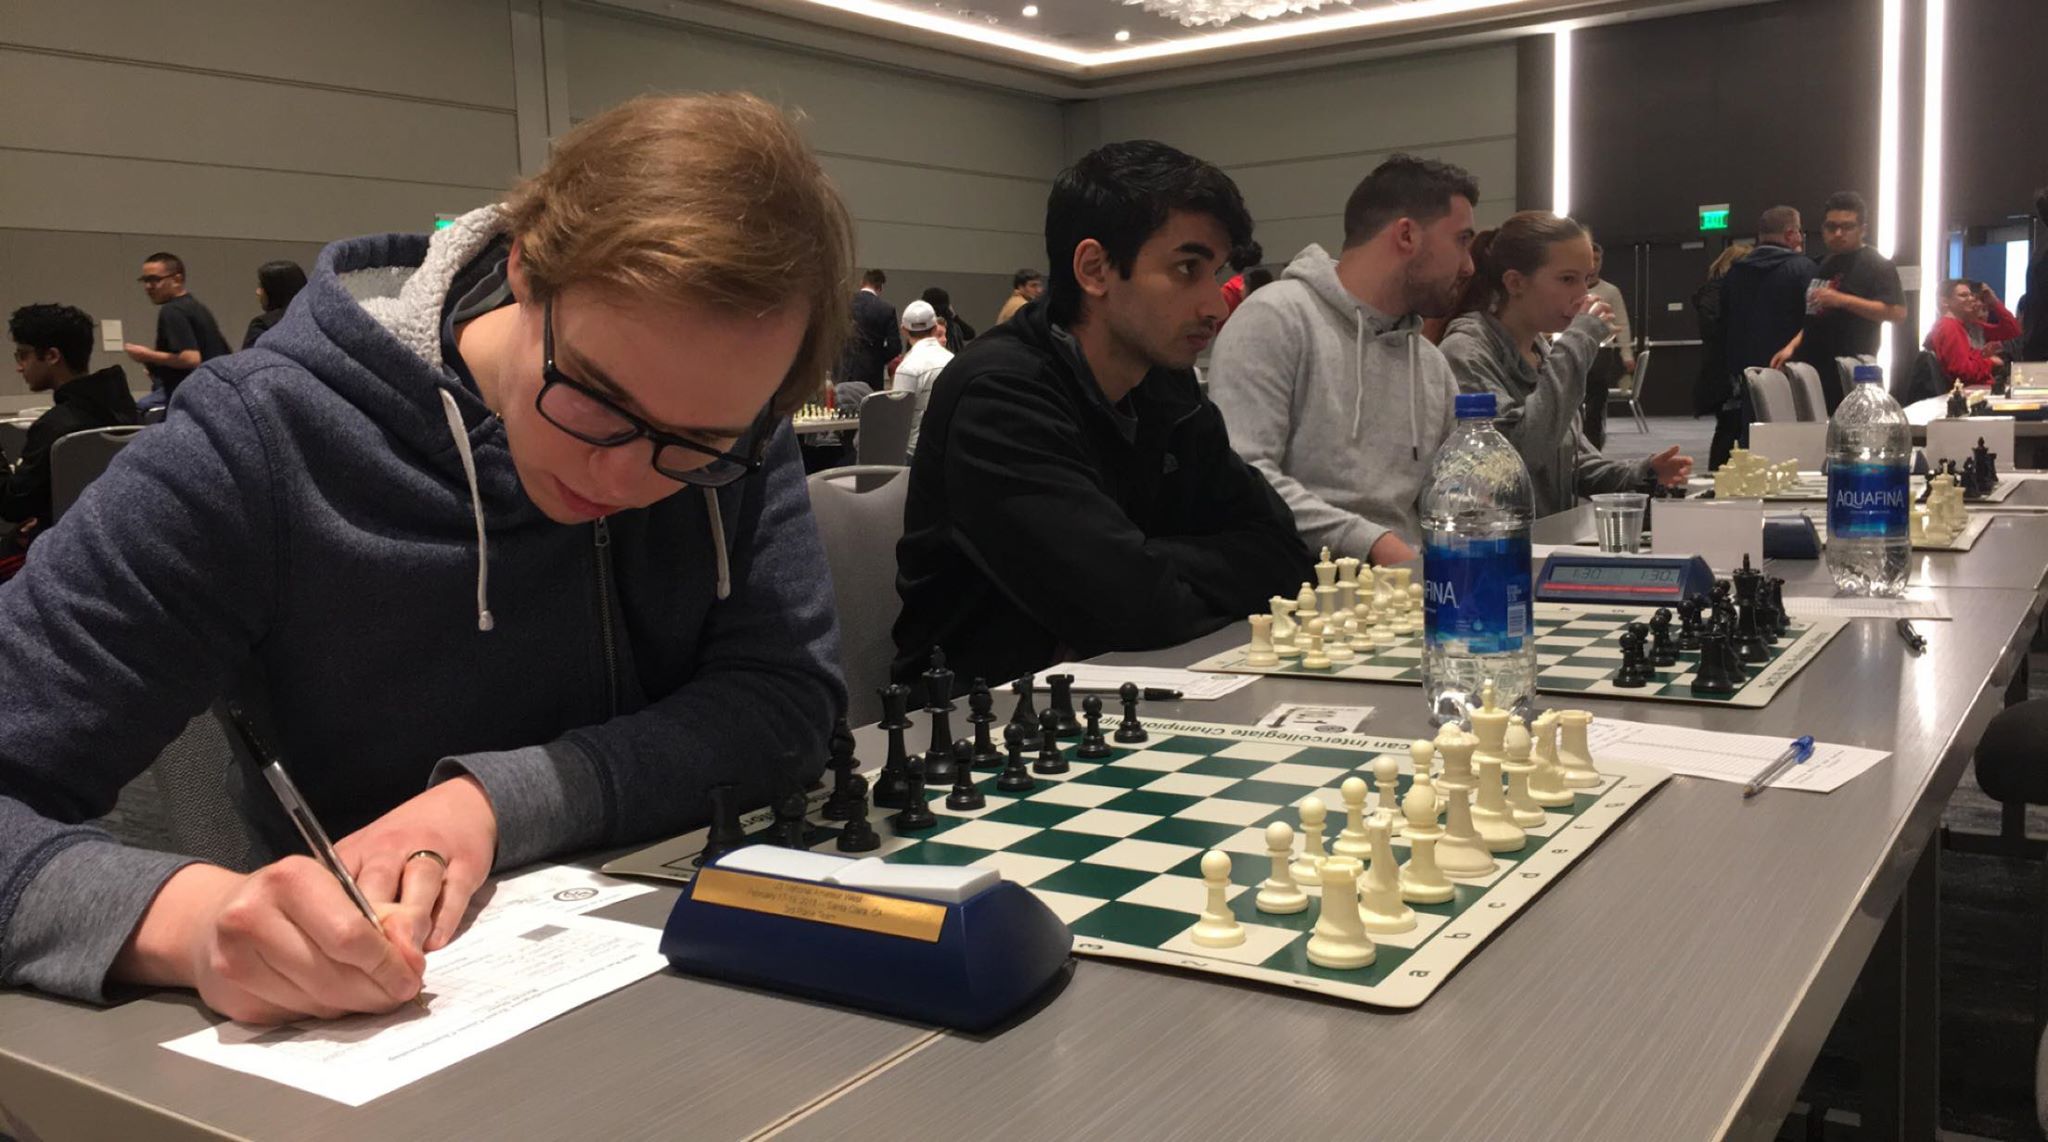 DSST: Conservatory Green High School Chess Club/Team makes winning moves on  and off the board